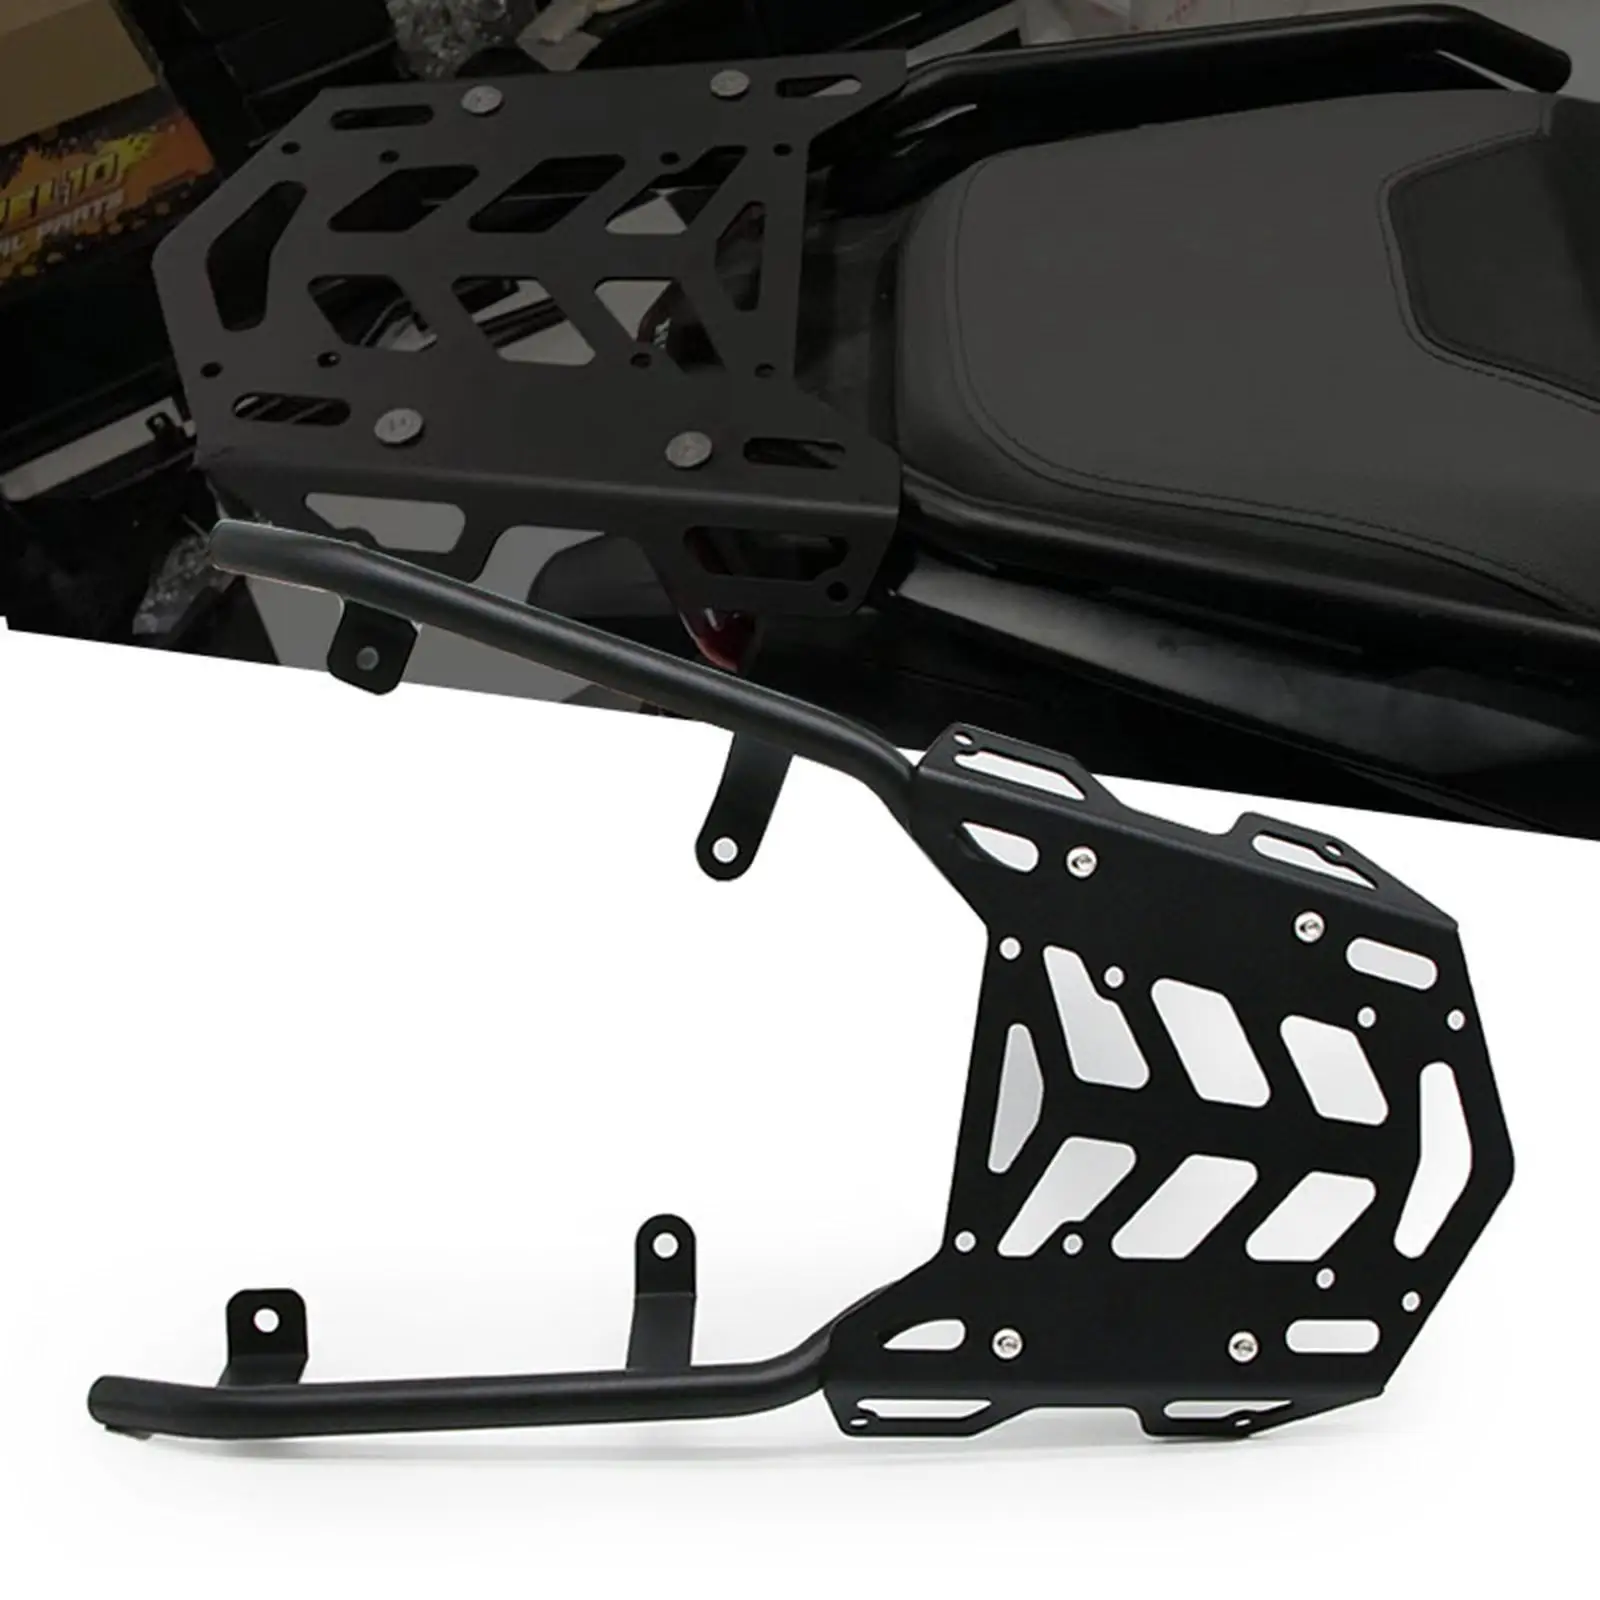 Motorcycle Rear  Base, Tail Rack, Support Carrier Shelf, Bracket   for  150 1, Parts ,Accessories 